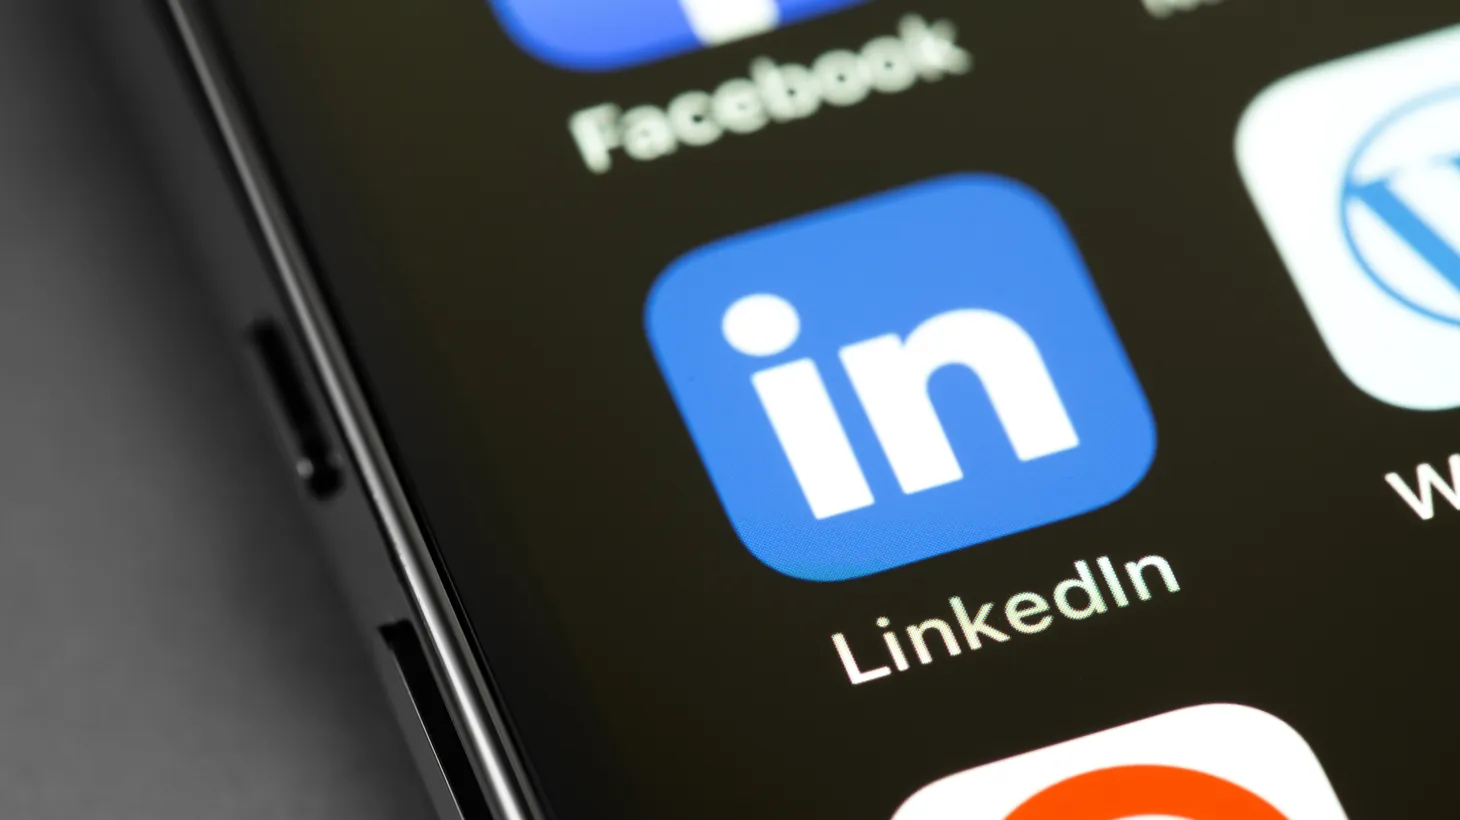 “The teenagers that I talked to … some of them really love LinkedIn. A lot of them just see it as really useful. It's utility. It's safe. It's easy. It feels a little transactional sometimes, but it's getting me where I need to go,” says writer Anya Kamenetz.